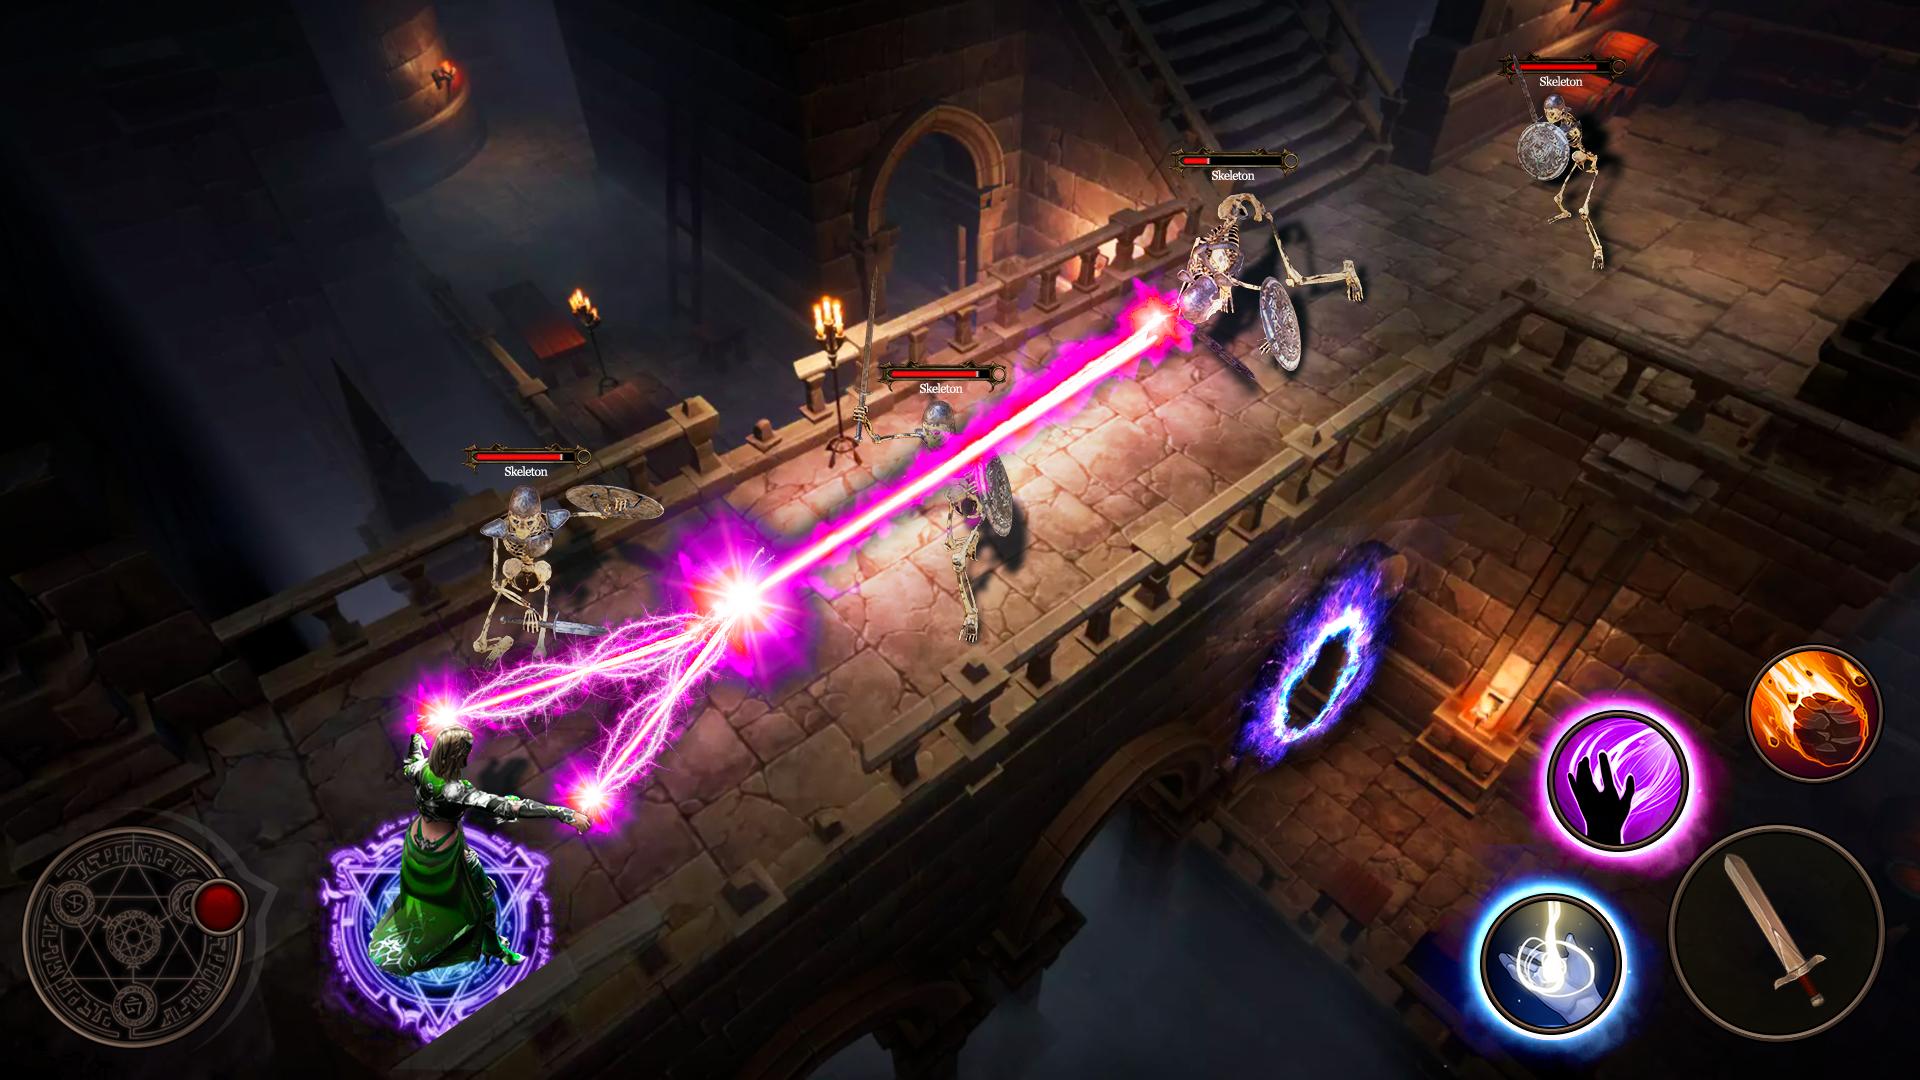 Rpg hack. Андроид Path of Evil: Immortal Hunter. Path of Immortals. Игры Action RPG на Android. Action/RPG И Hack and Slash.